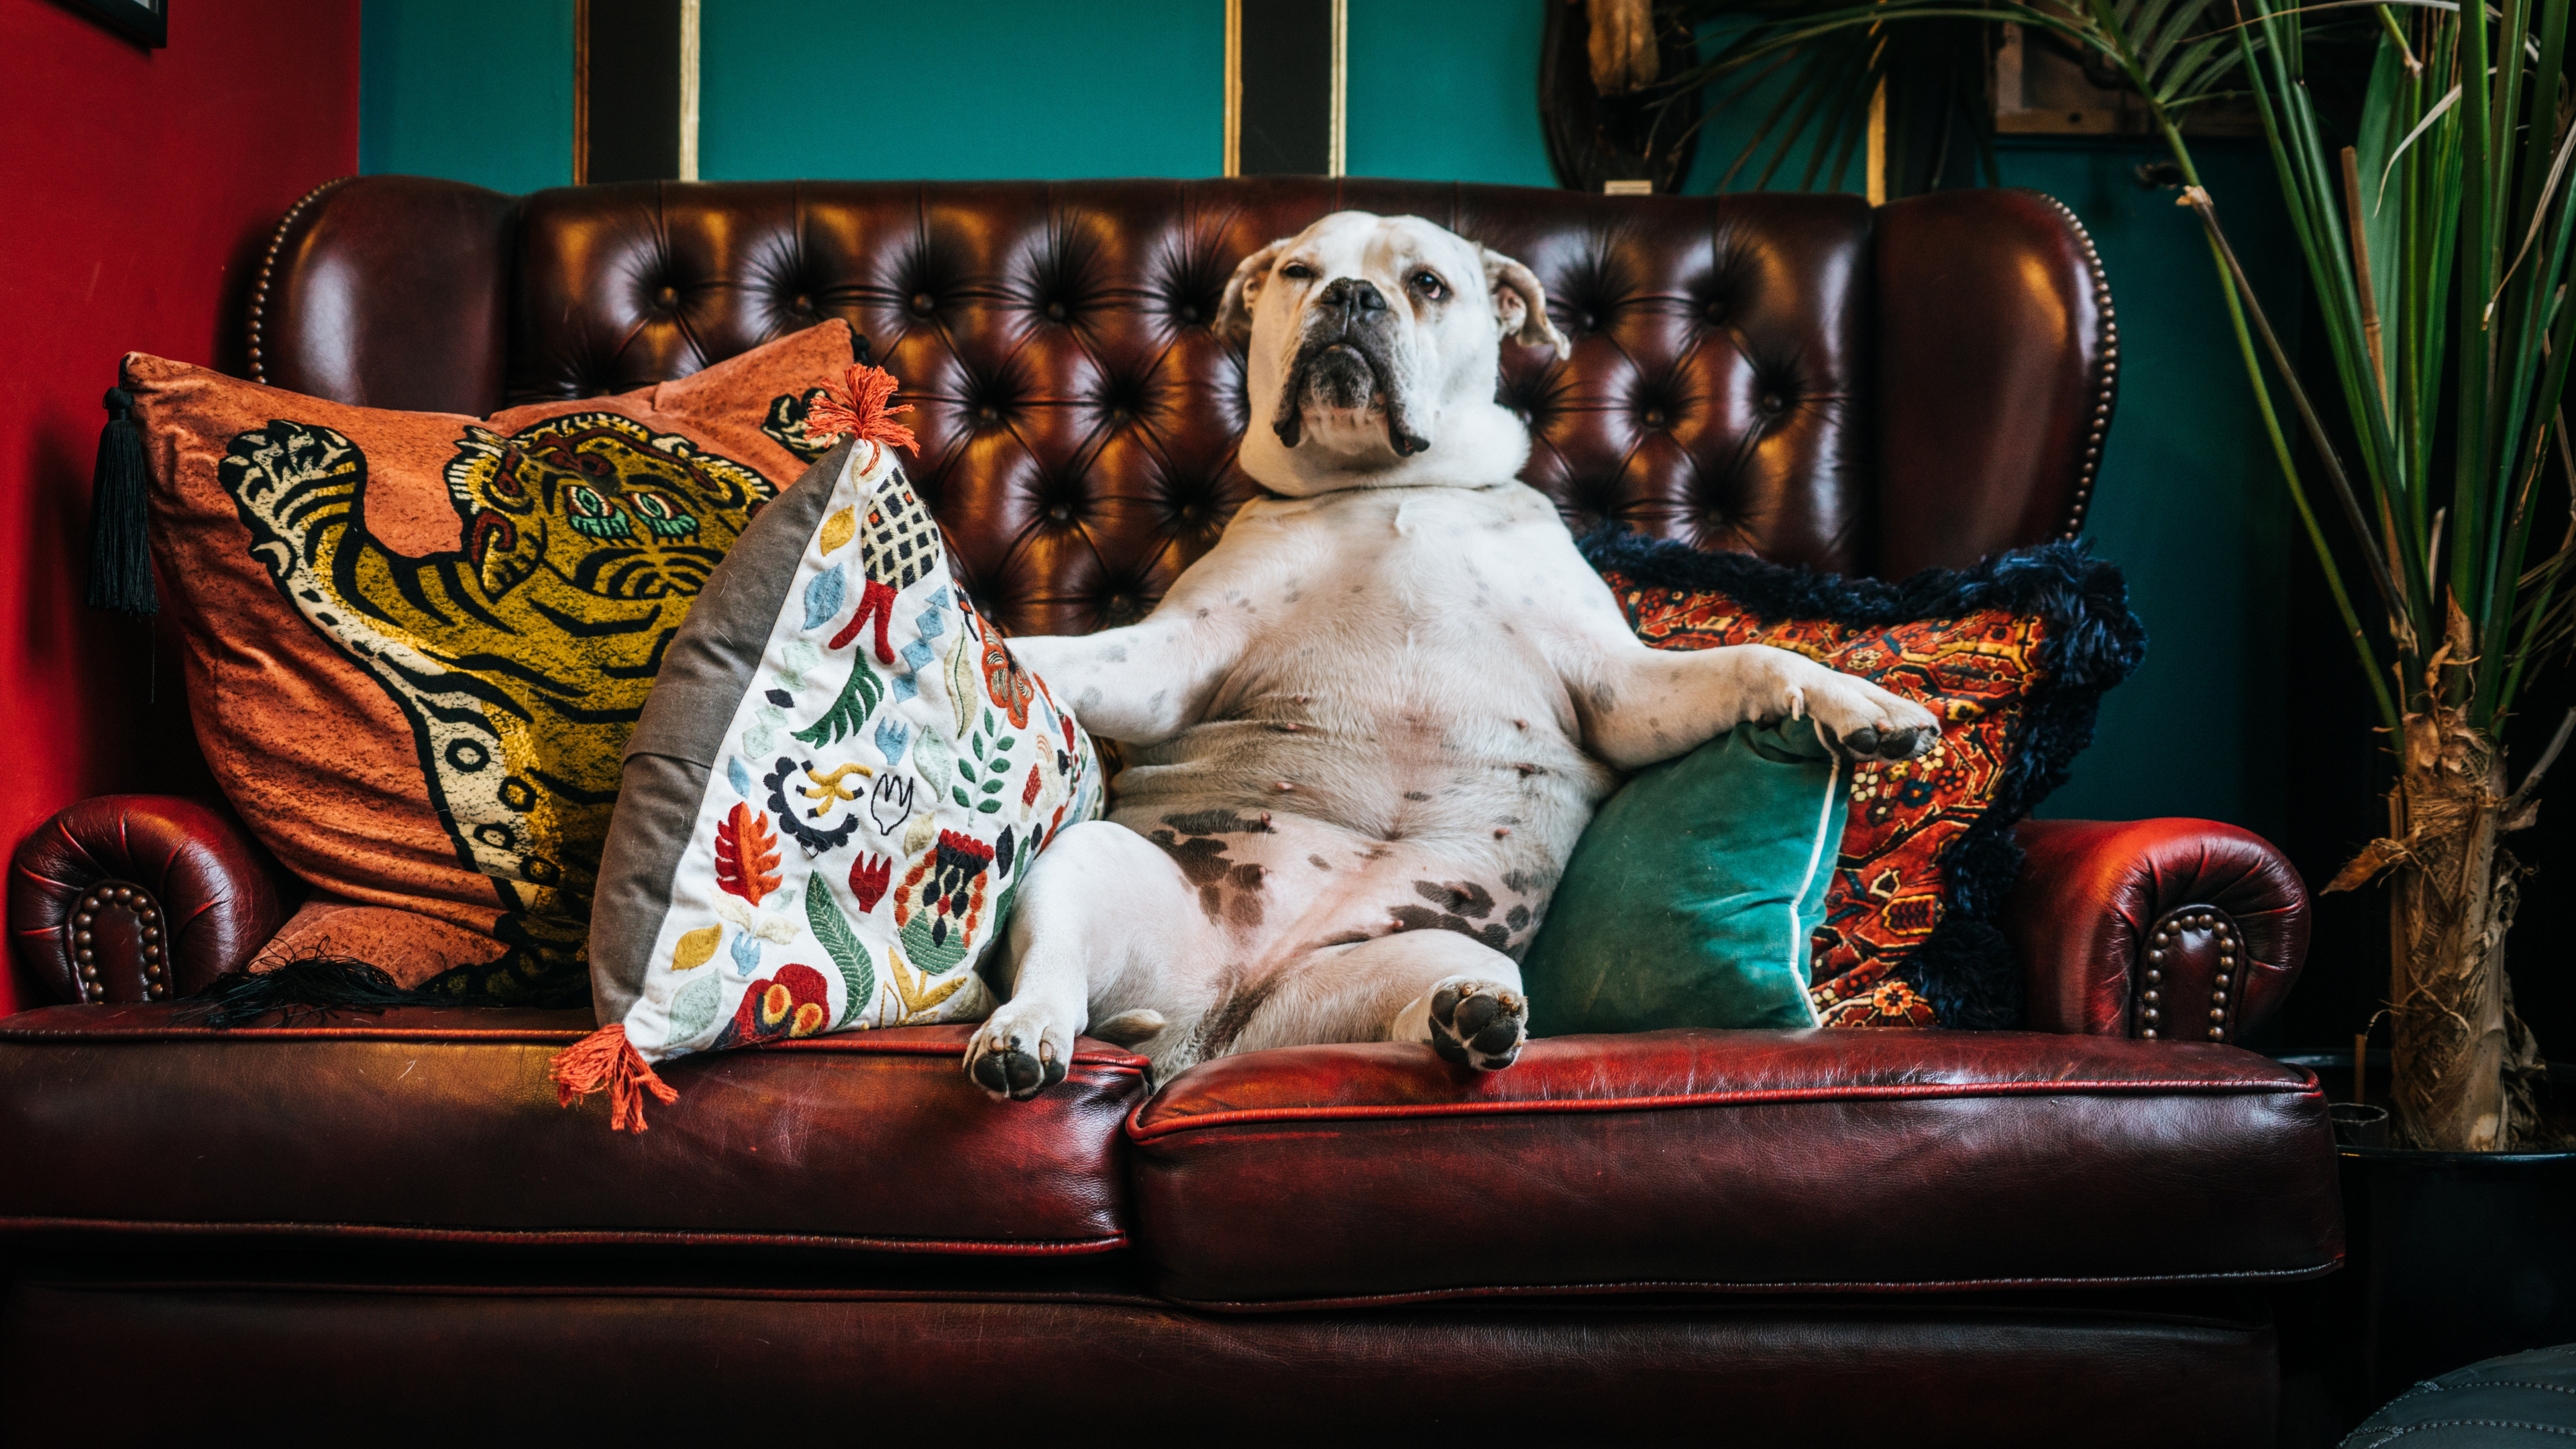 White and Black Short Coated Dog on Red and White Floral Throw Pillow on Red Sofa. Wallpaper in 3840x2160 Resolution